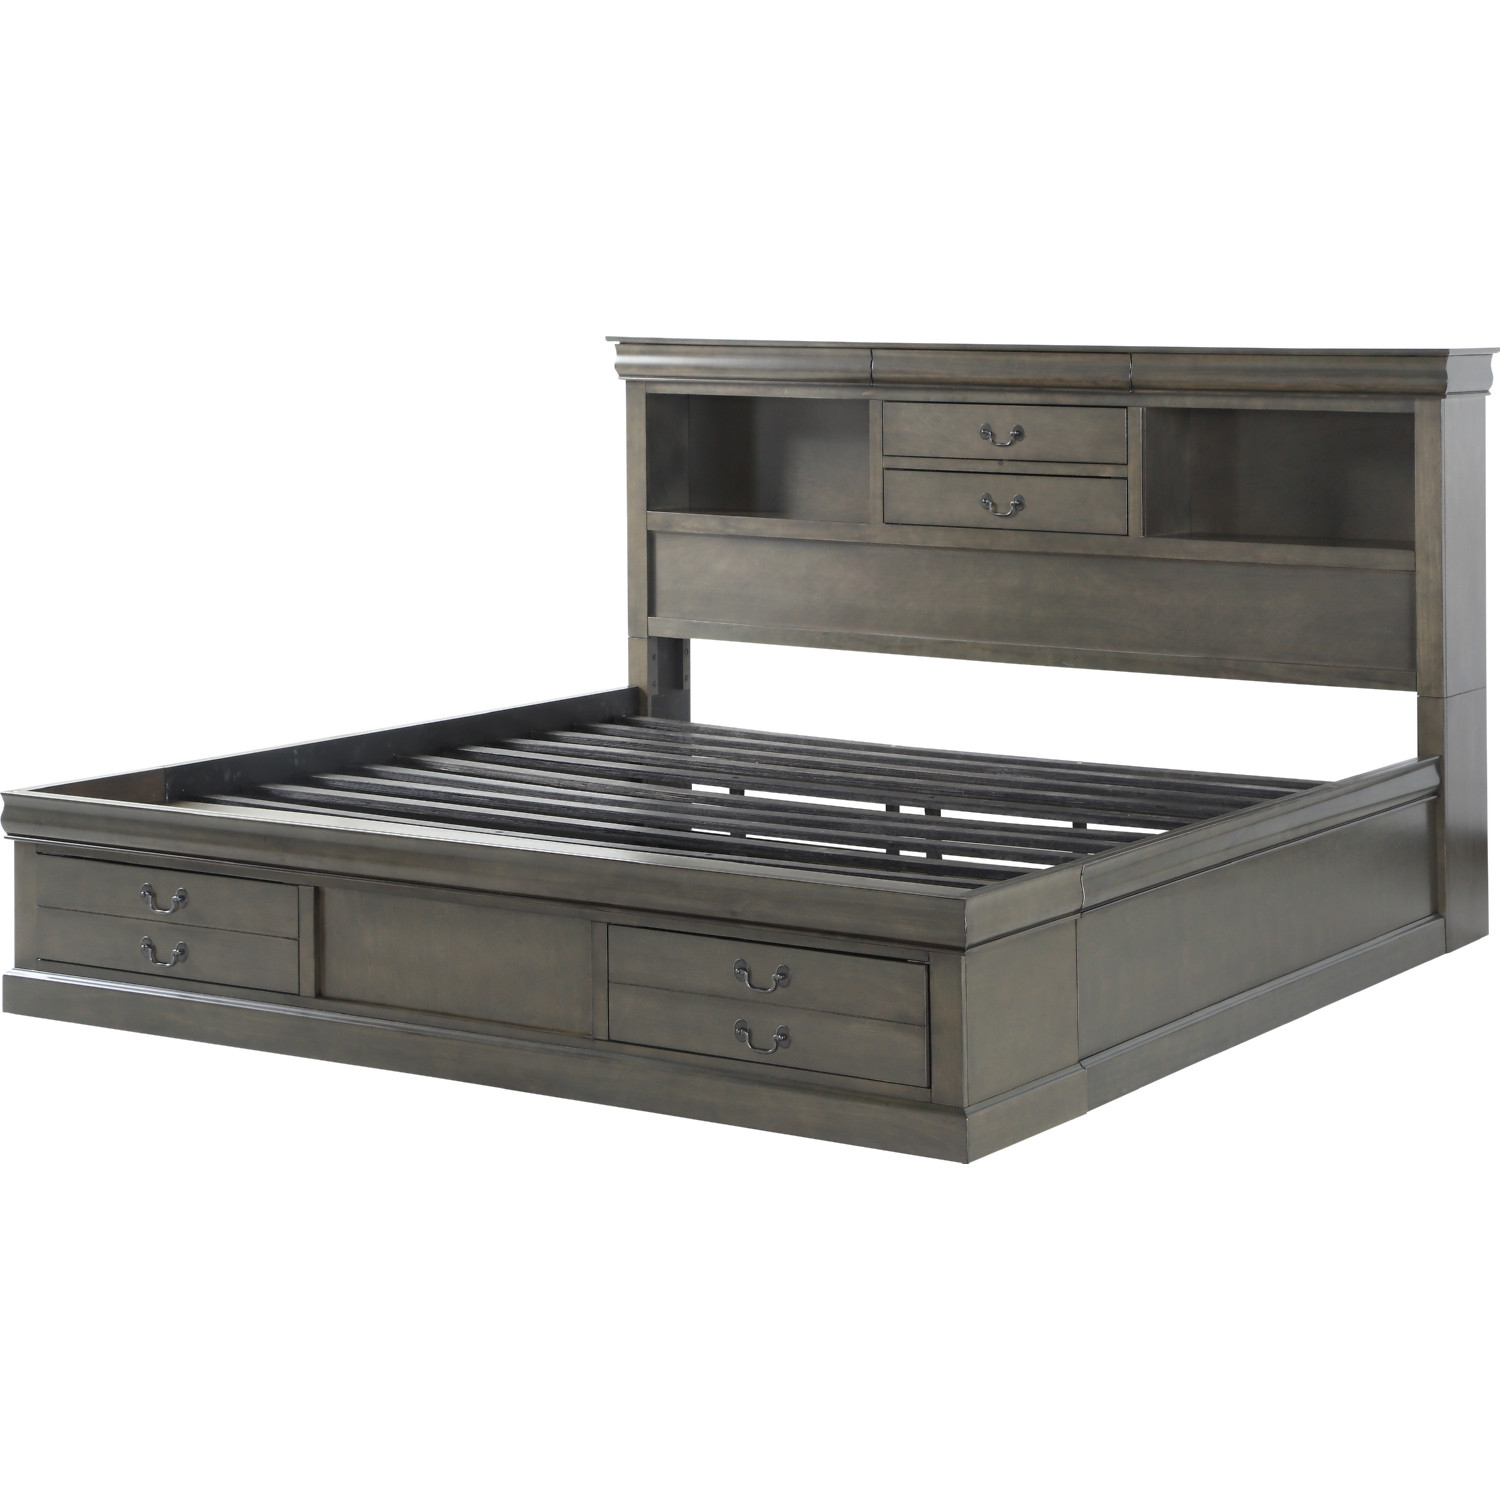 Acme Louis Philippe III Bed with Storage - Antique Gray 24360Q-Bed at